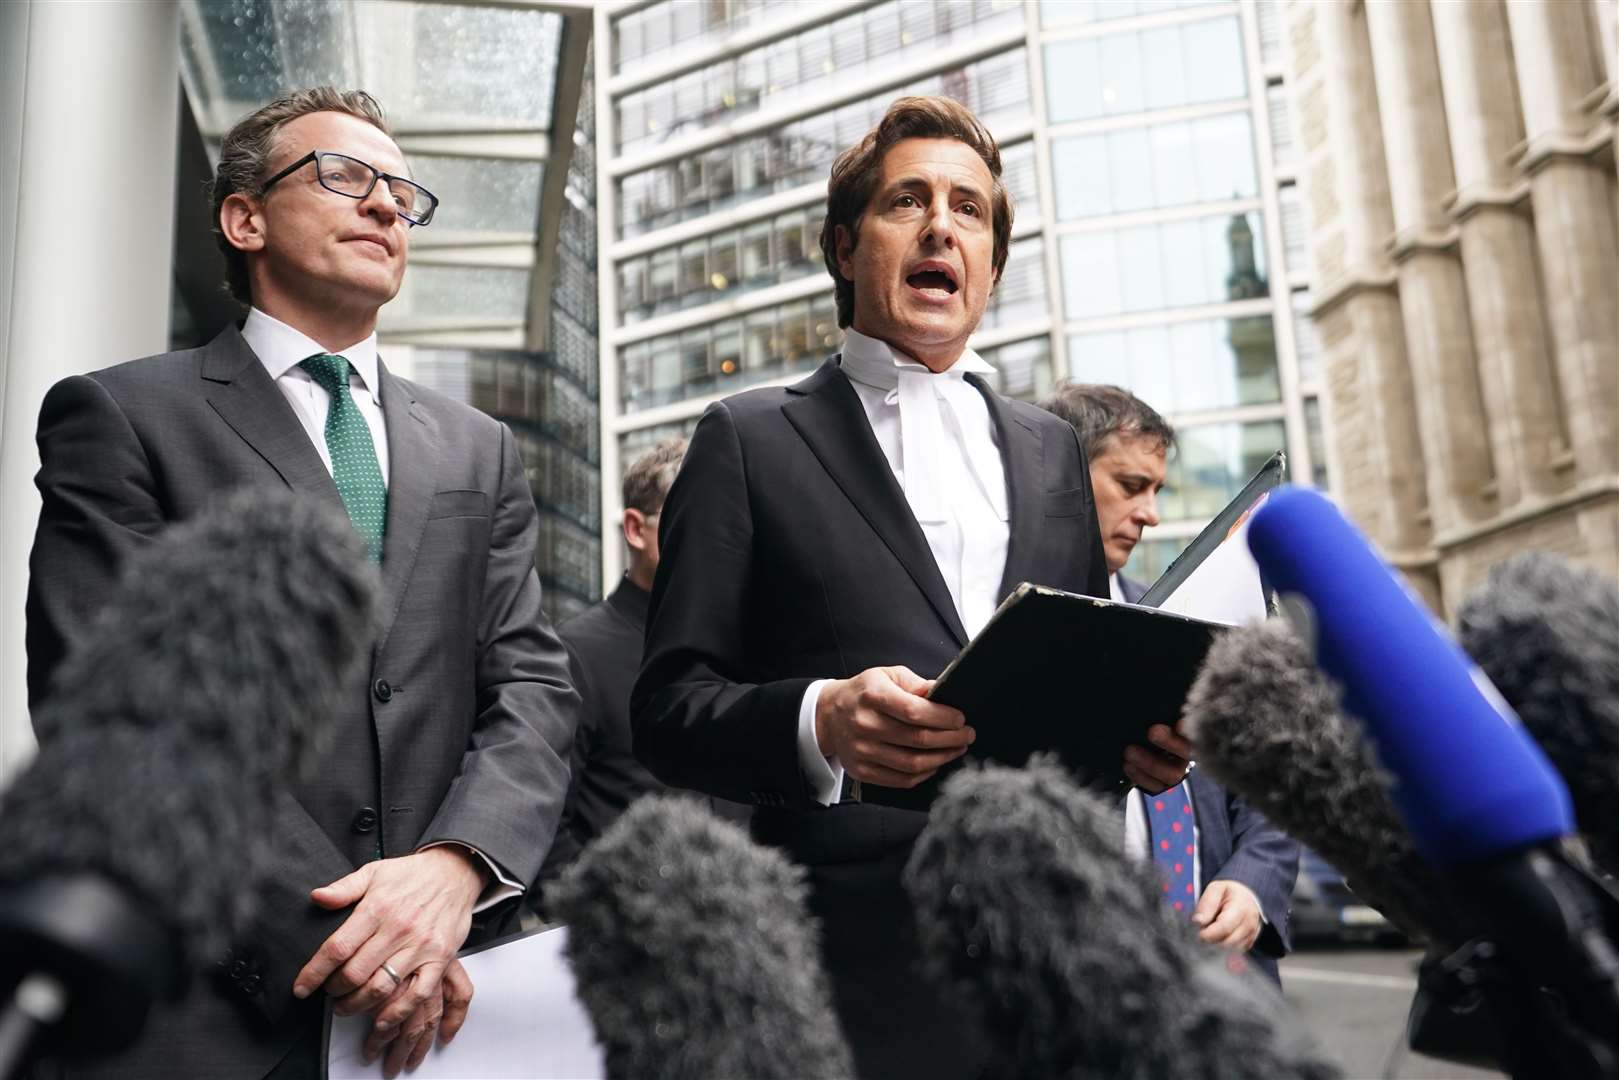 The Duke of Sussex’s barrister, David Sherborne, speaks to the media outside the Rolls Building in central London (James Manning/PA)